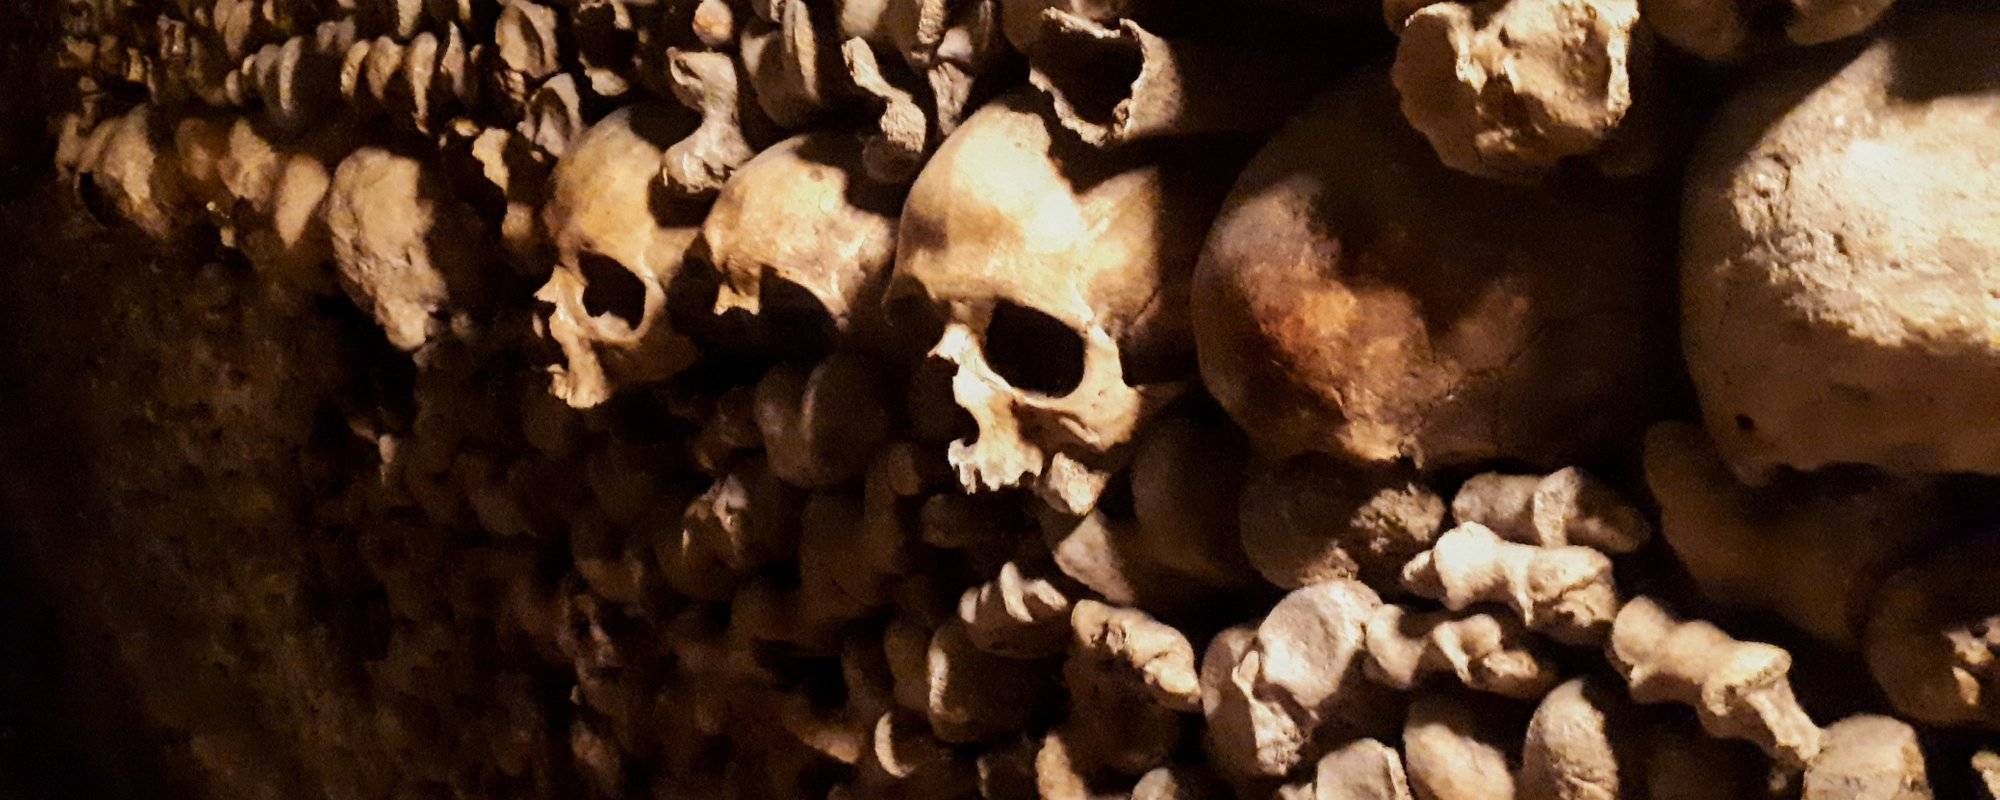 Empire of the Dead: the Catacombs of Paris